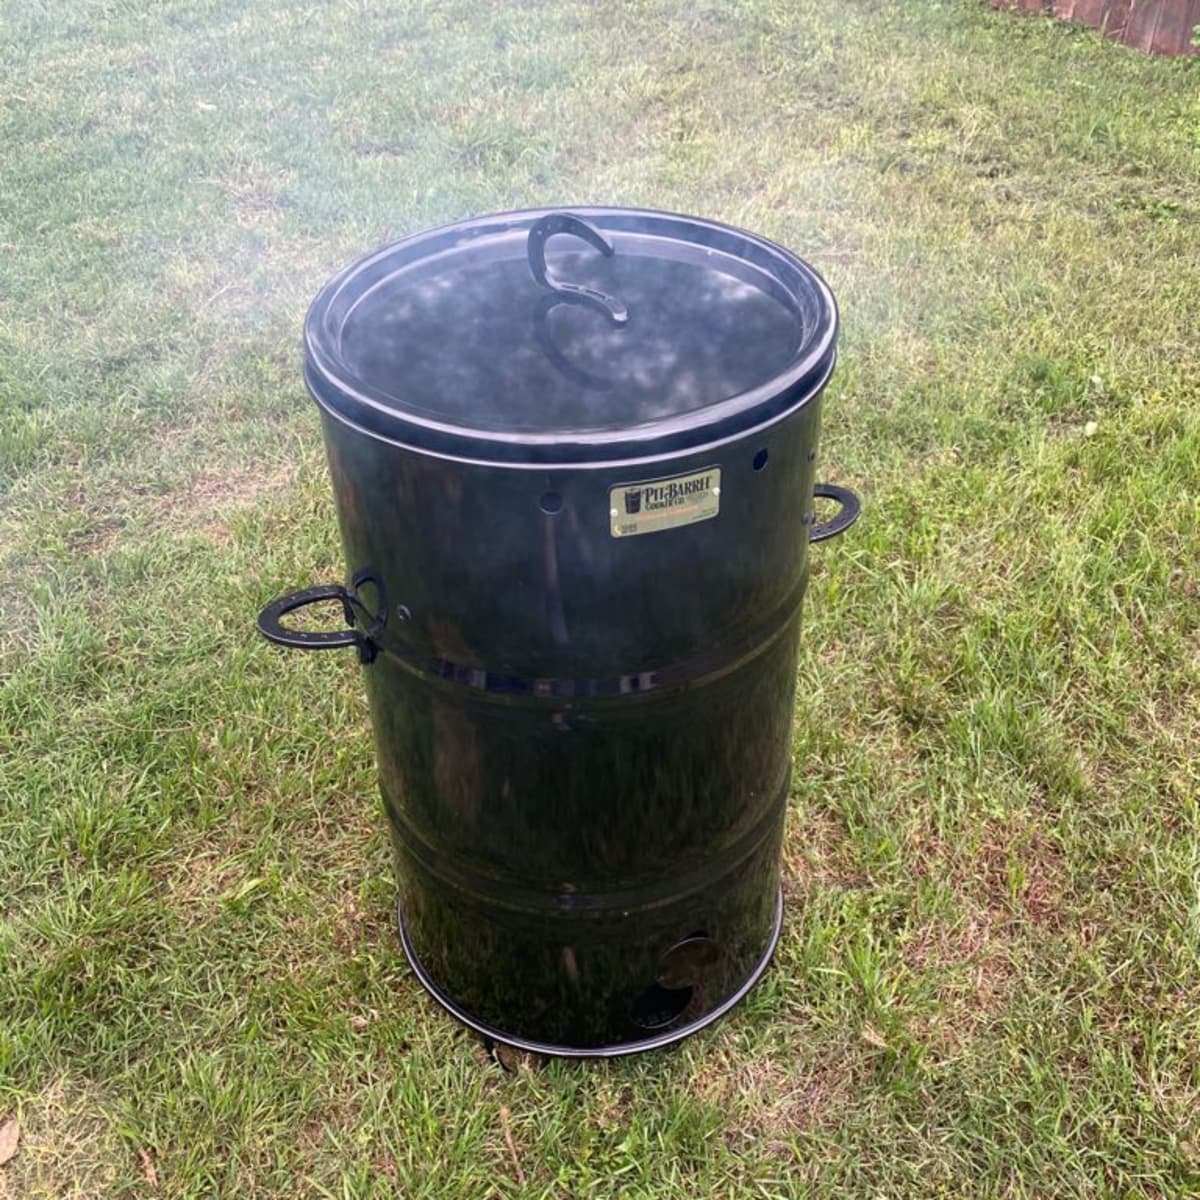 Smoke Ribs Fast on the Pit Barrel Cooker - Learn to Smoke Meat